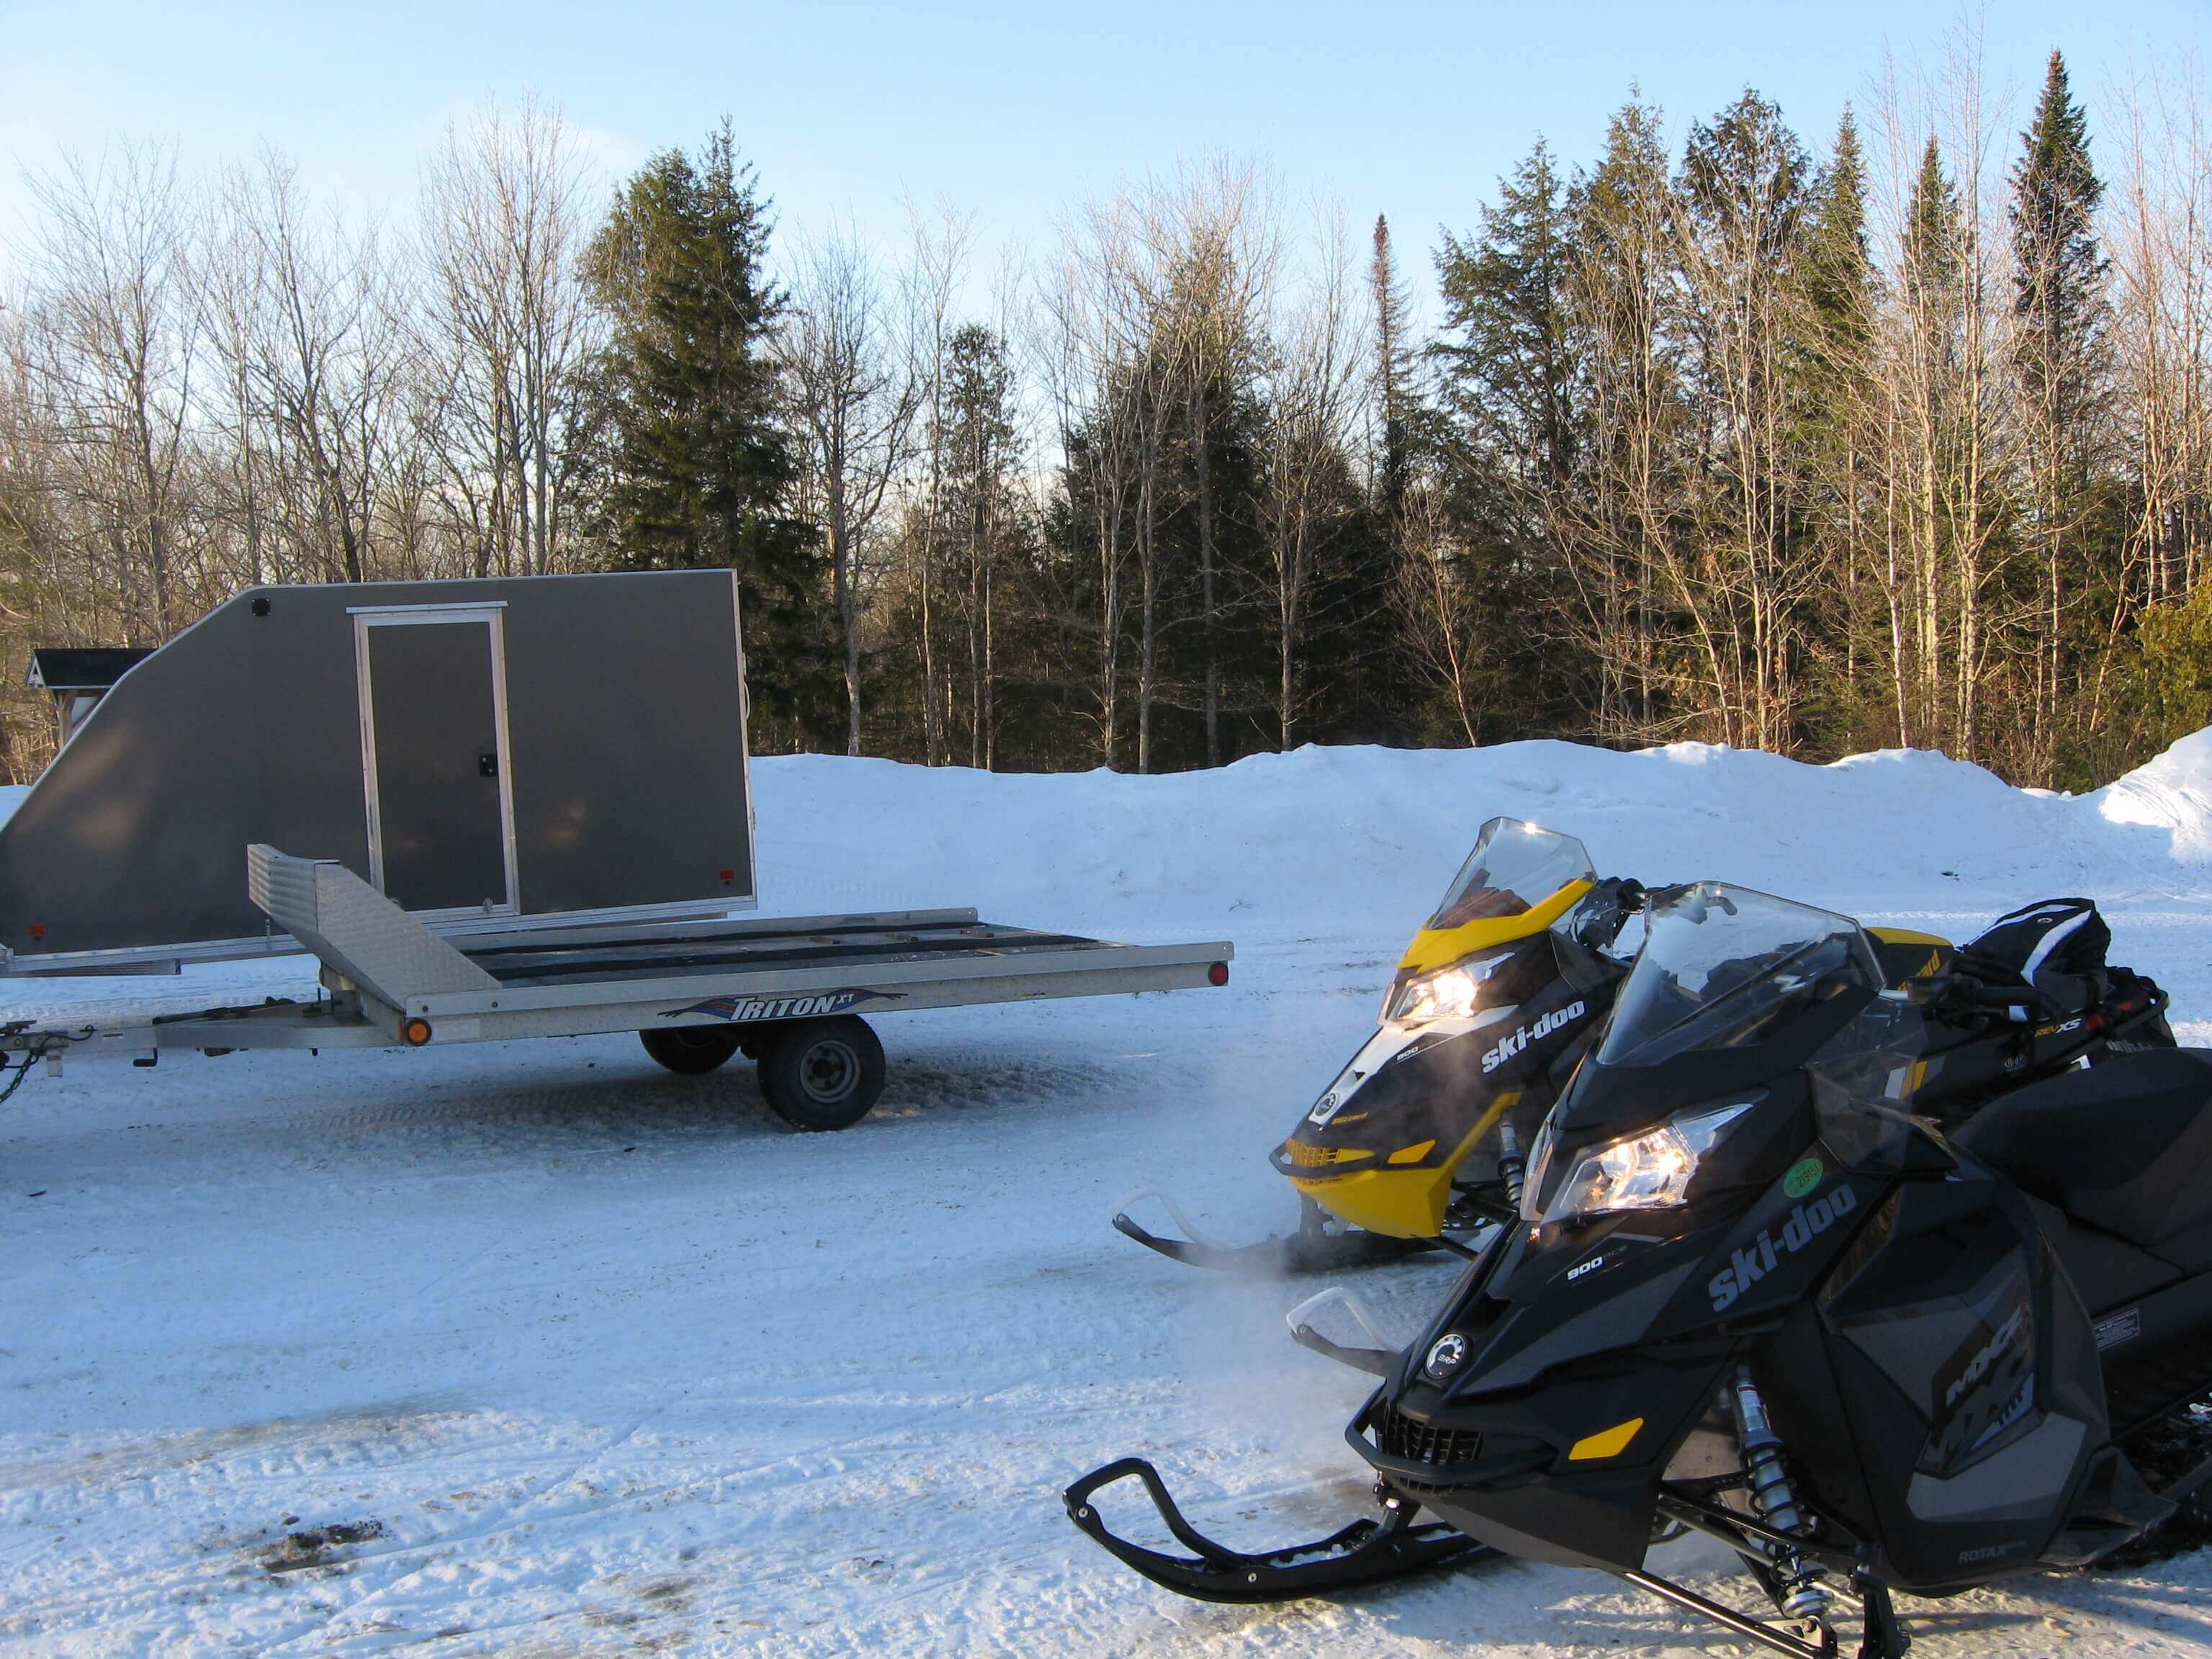 Snowmobile and trailer